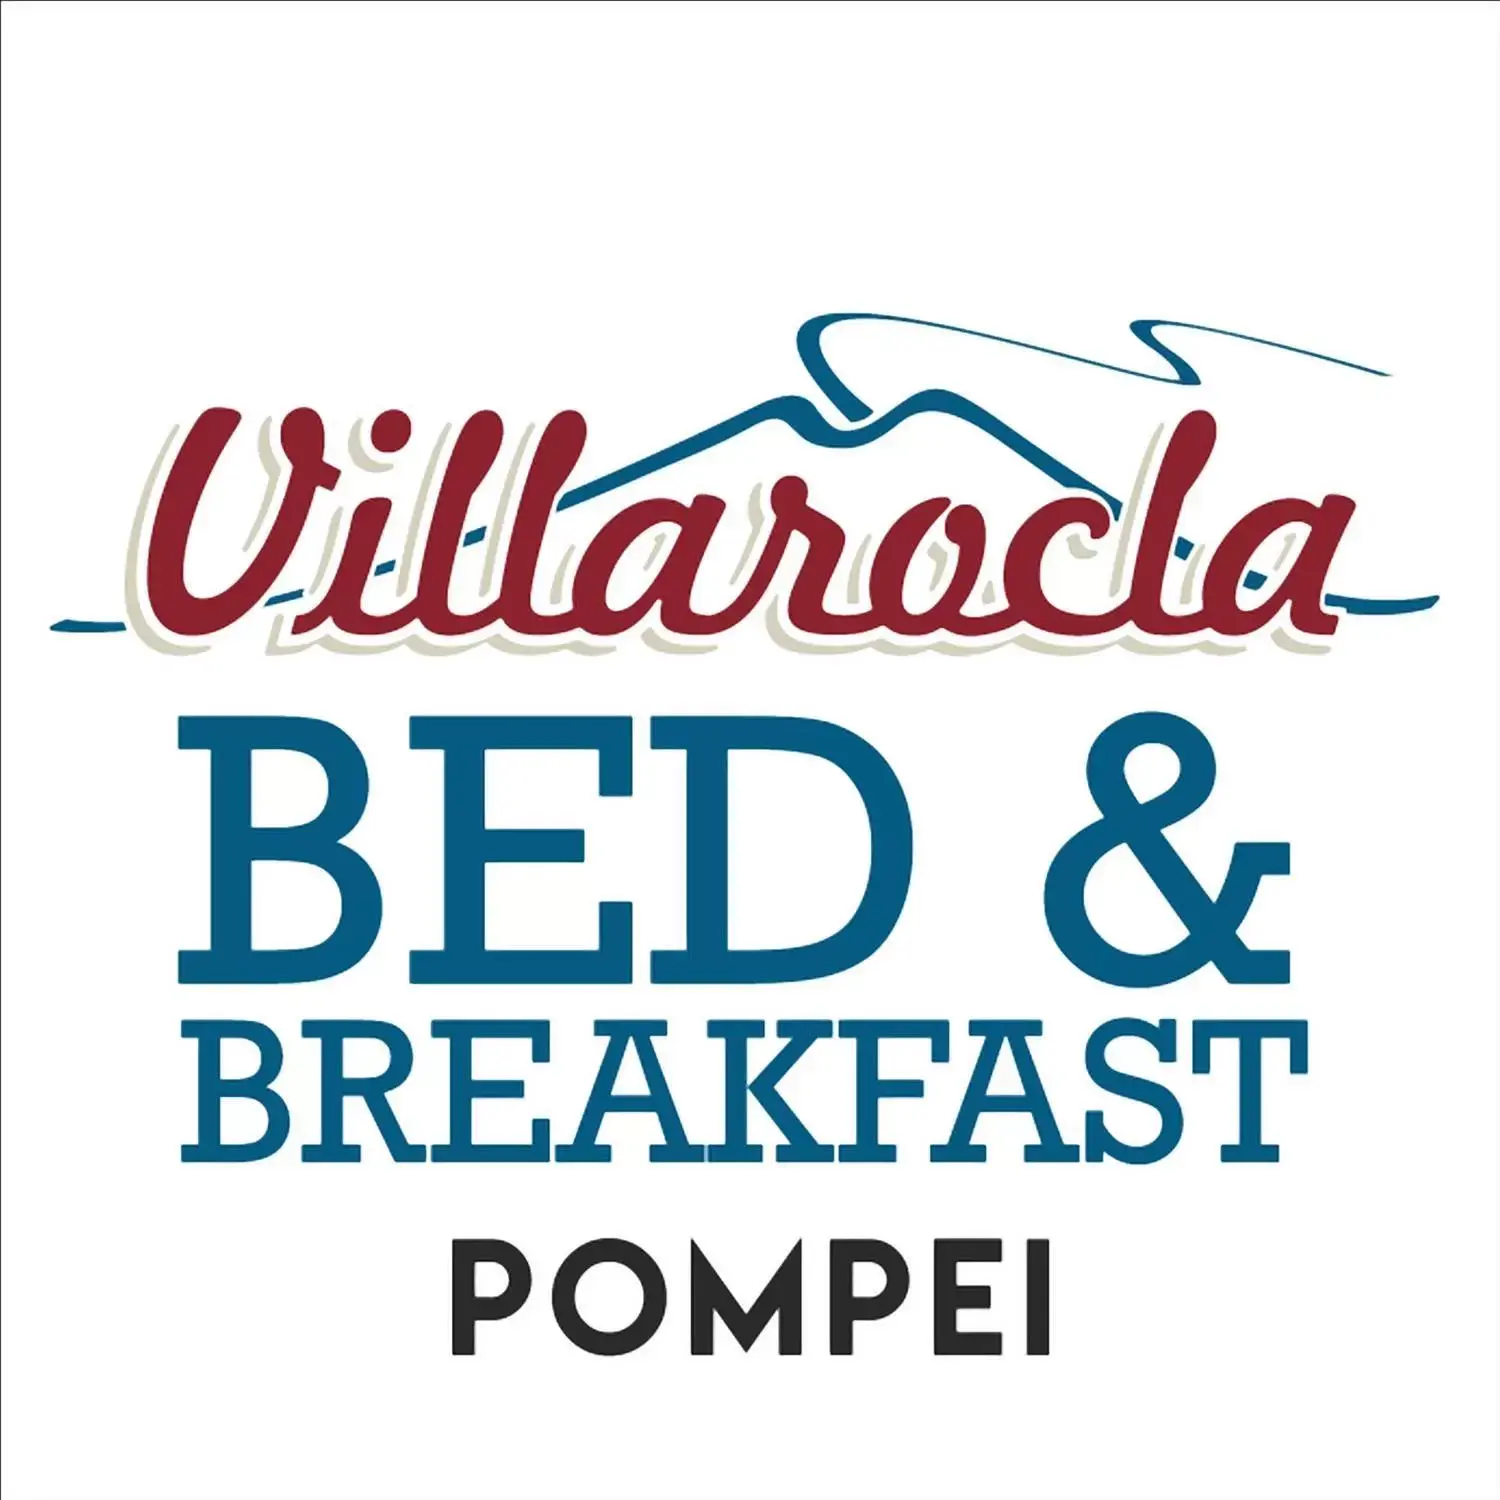 Property logo or sign in Villa Rocla guest house Pompei